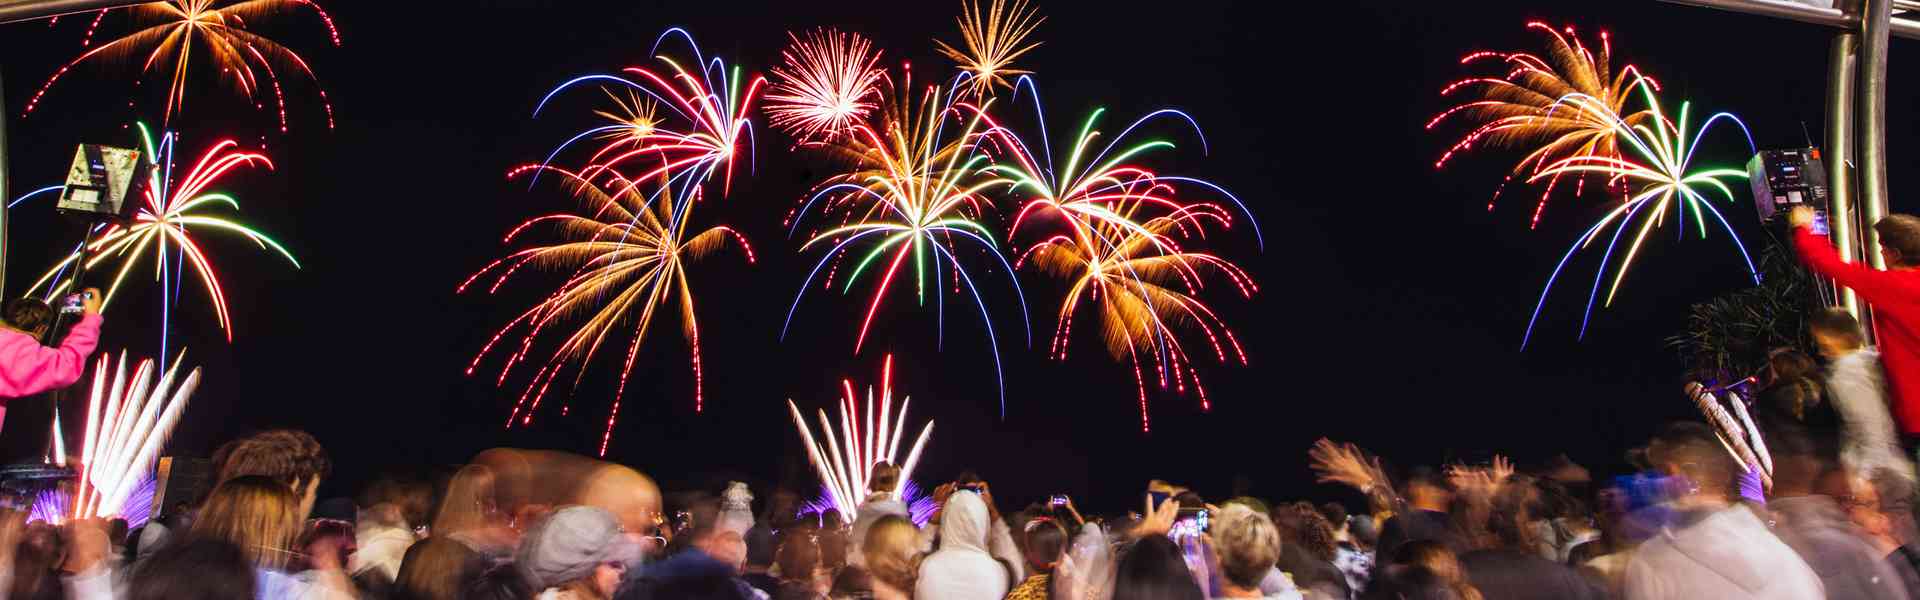 Celebrate New Year's Eve on the Gold Coast